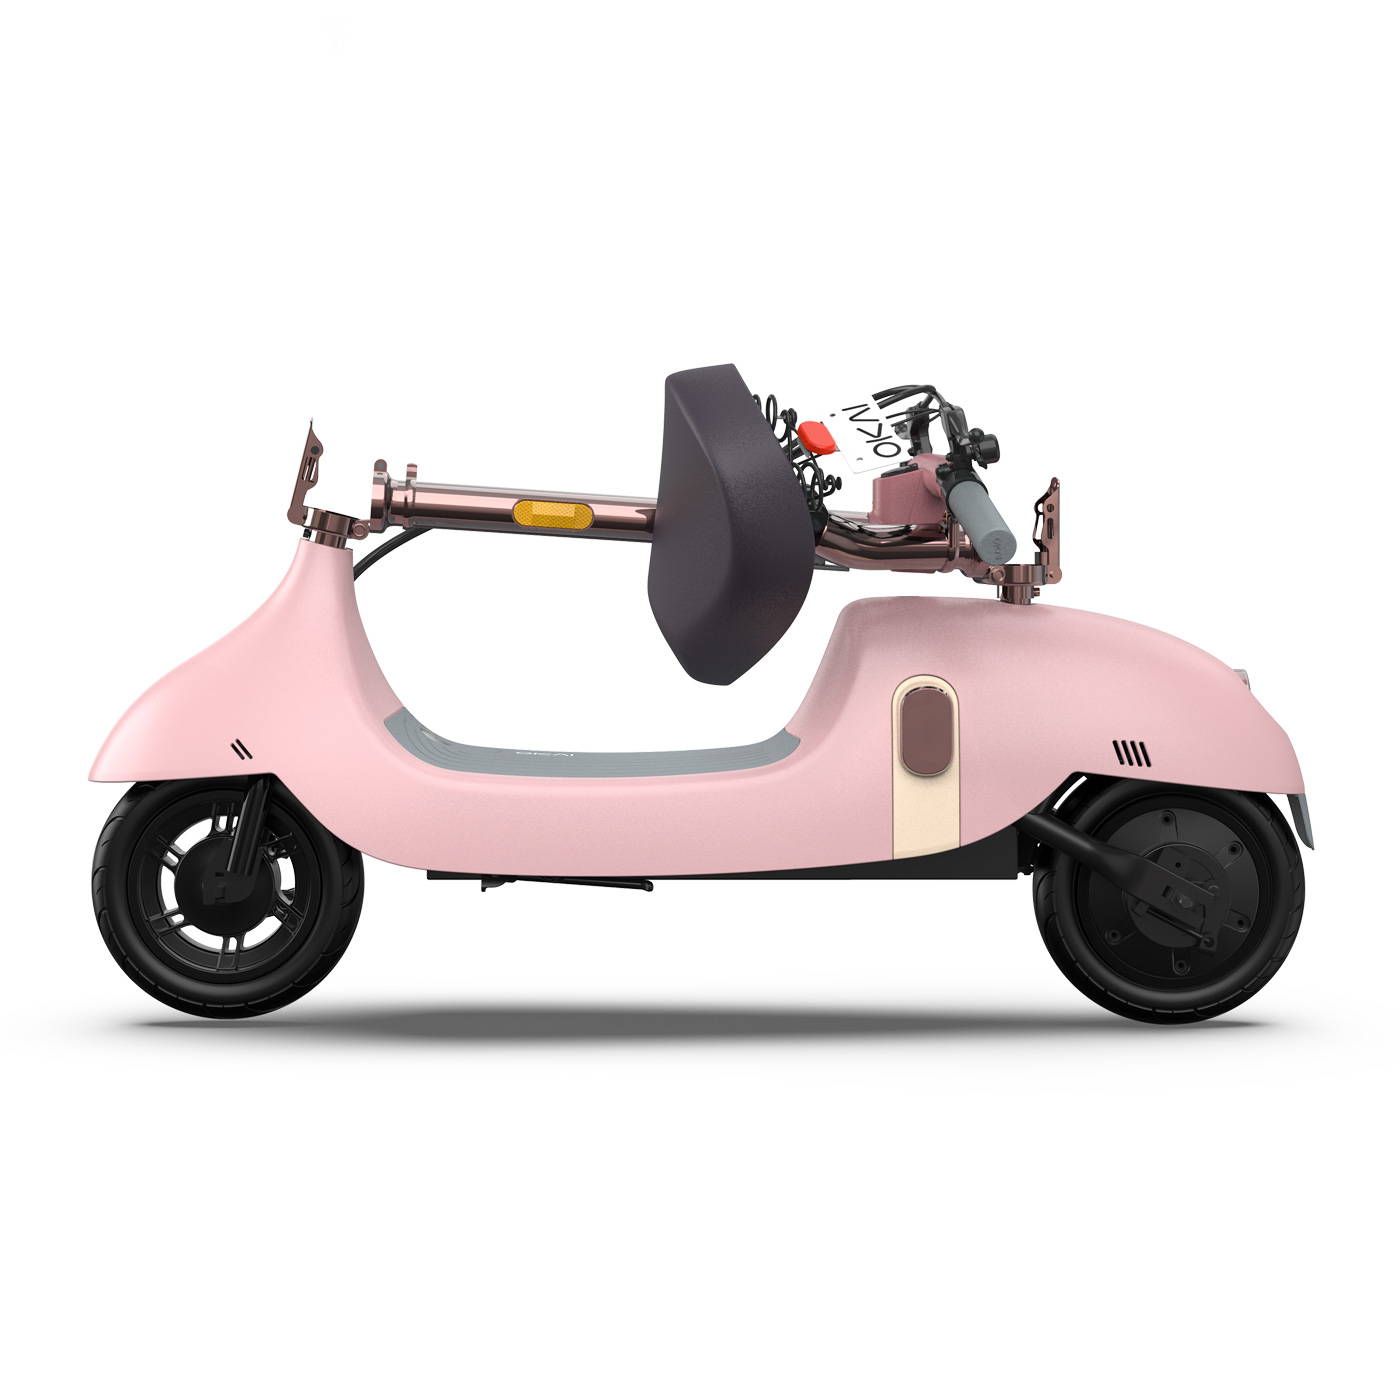 Okai-es200-electric-scooter-folded-scooter